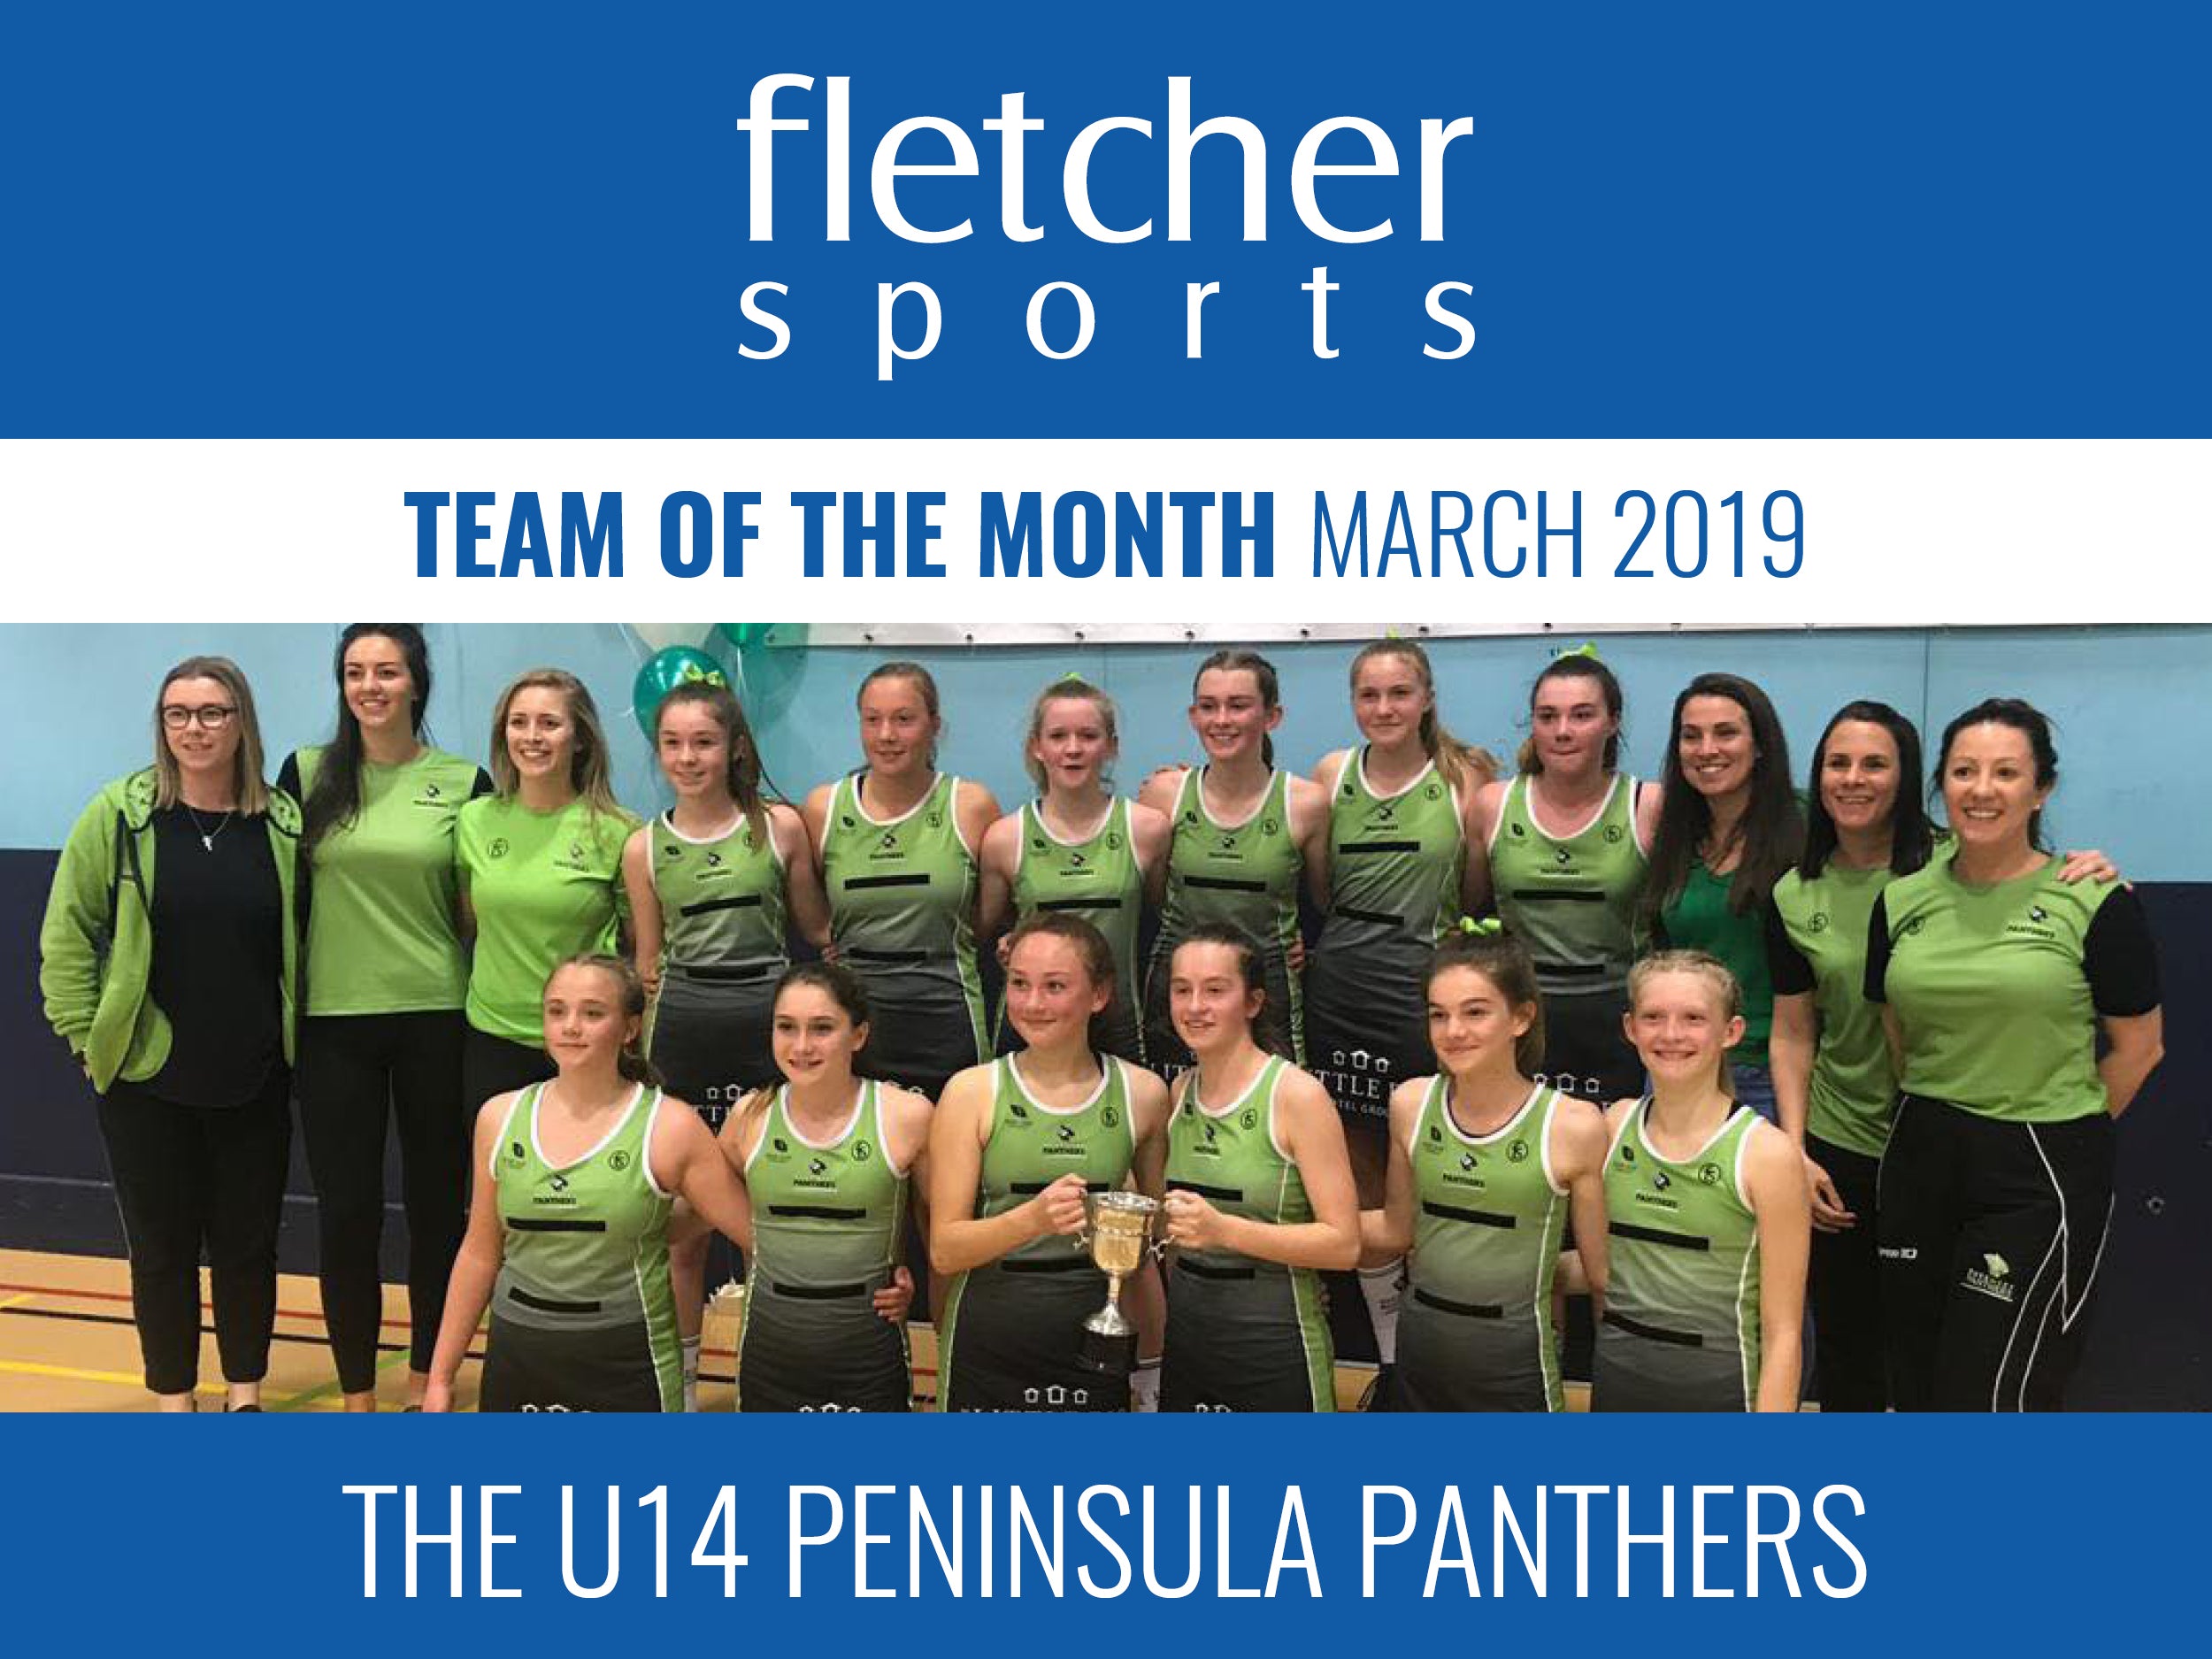 Team of the Month for March - The U14 Peninsula Panthers